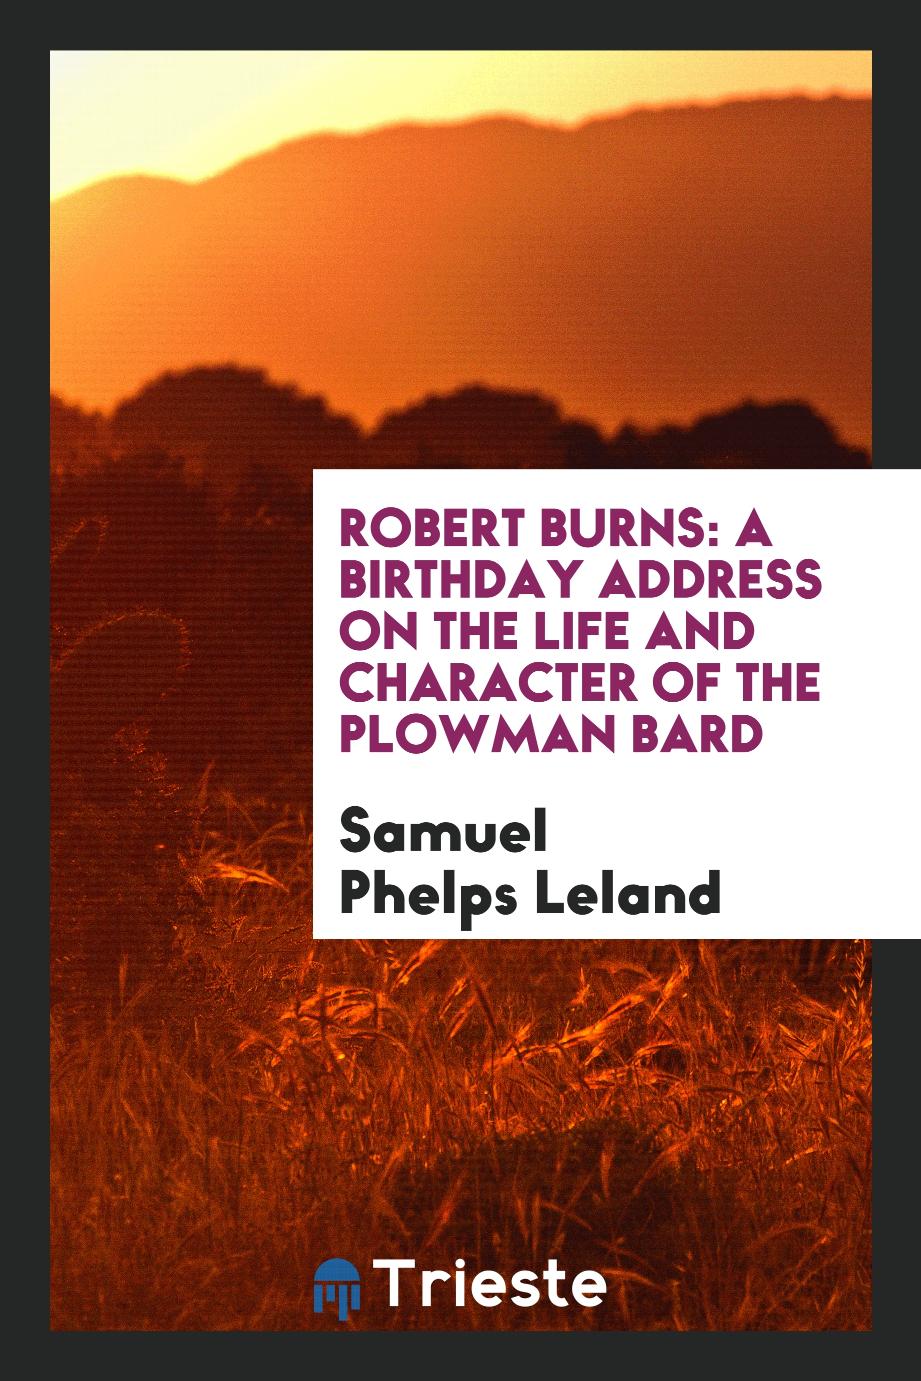 Robert Burns: a birthday address on the life and character of the plowman bard